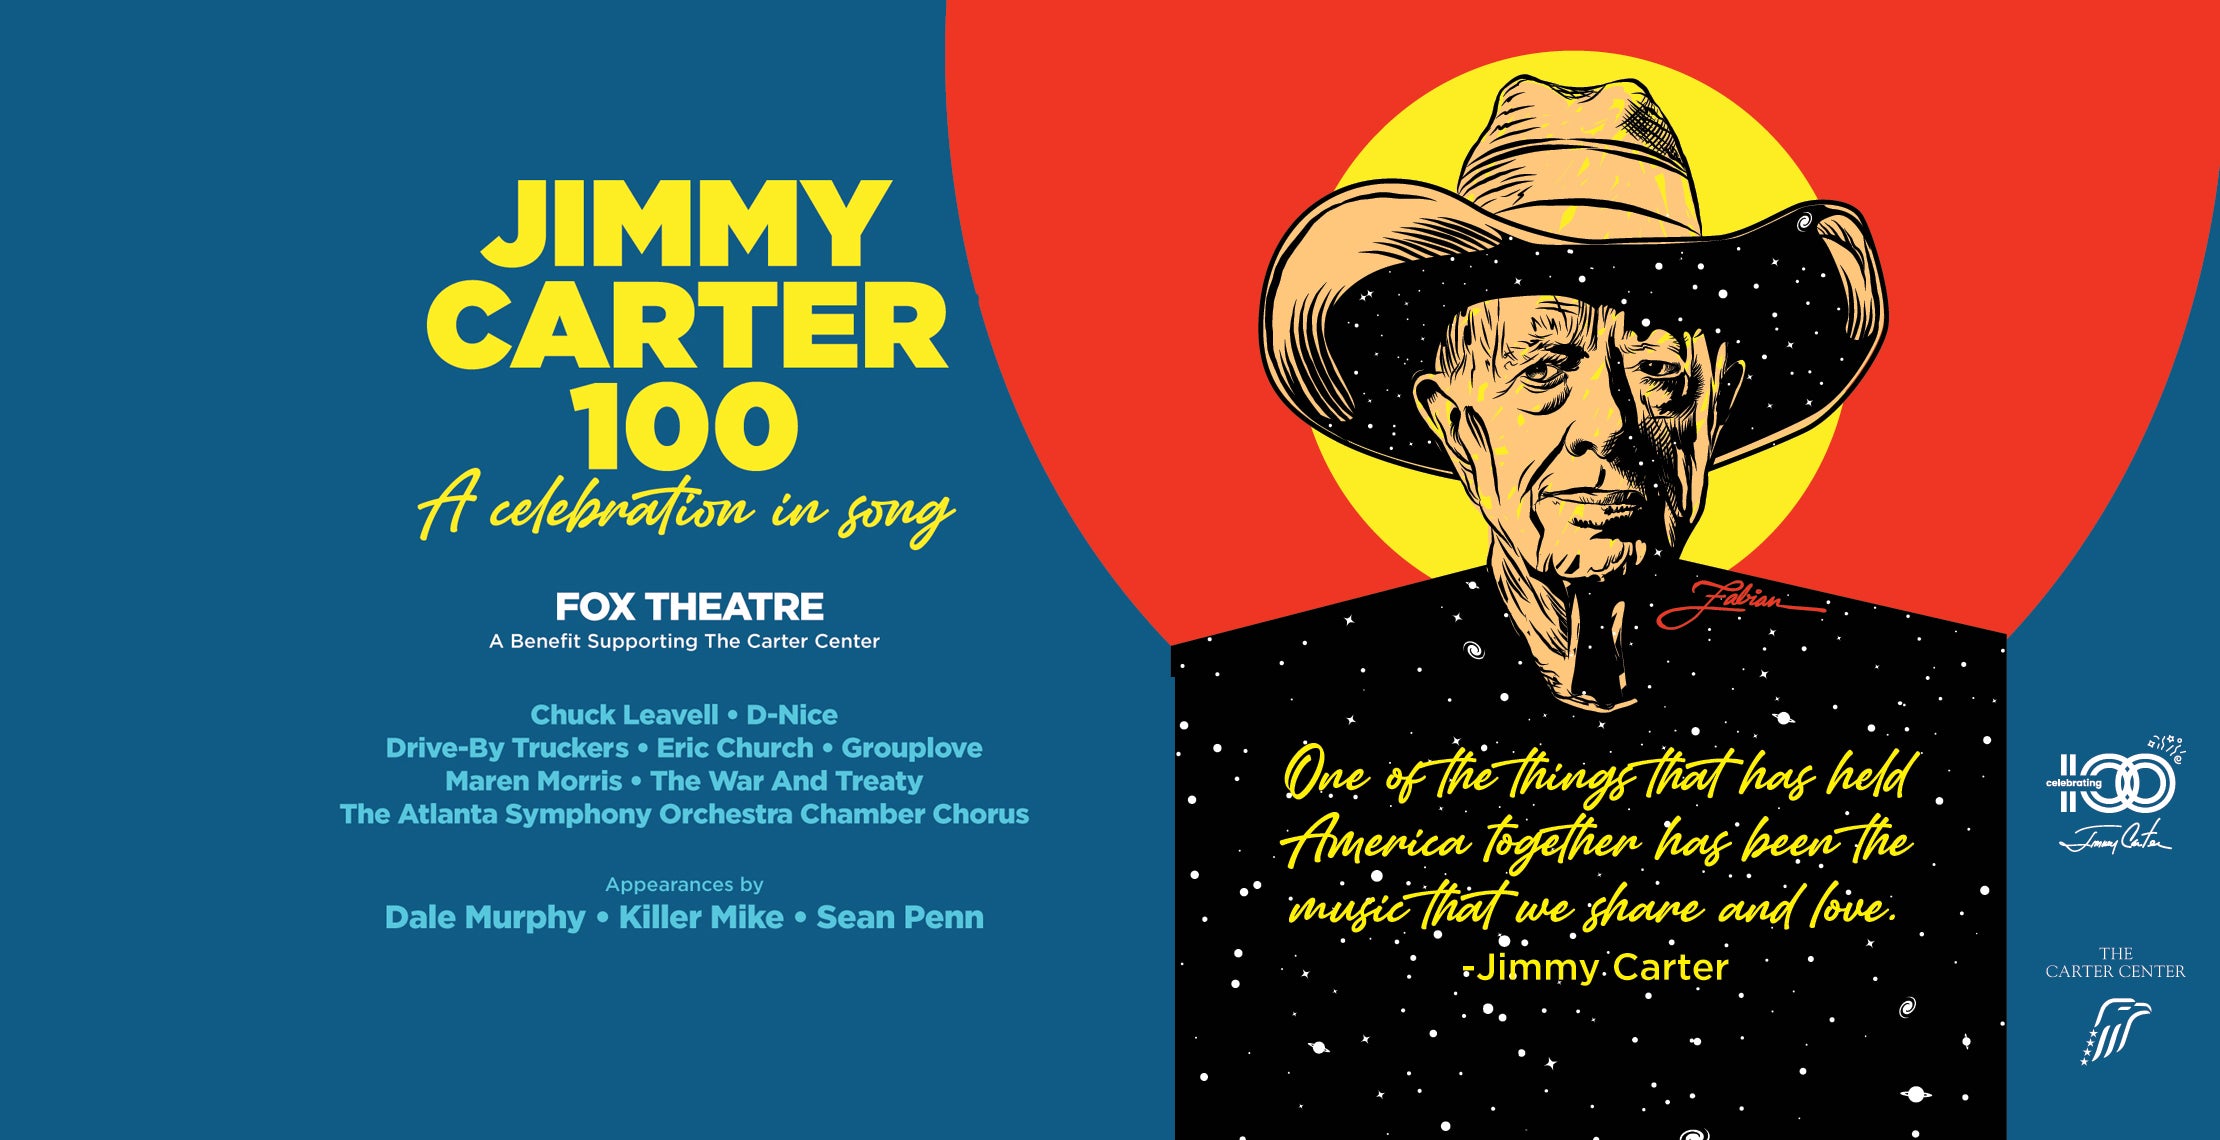 Delta Air Lines Presents: Jimmy Carter 100: A Celebration in Song